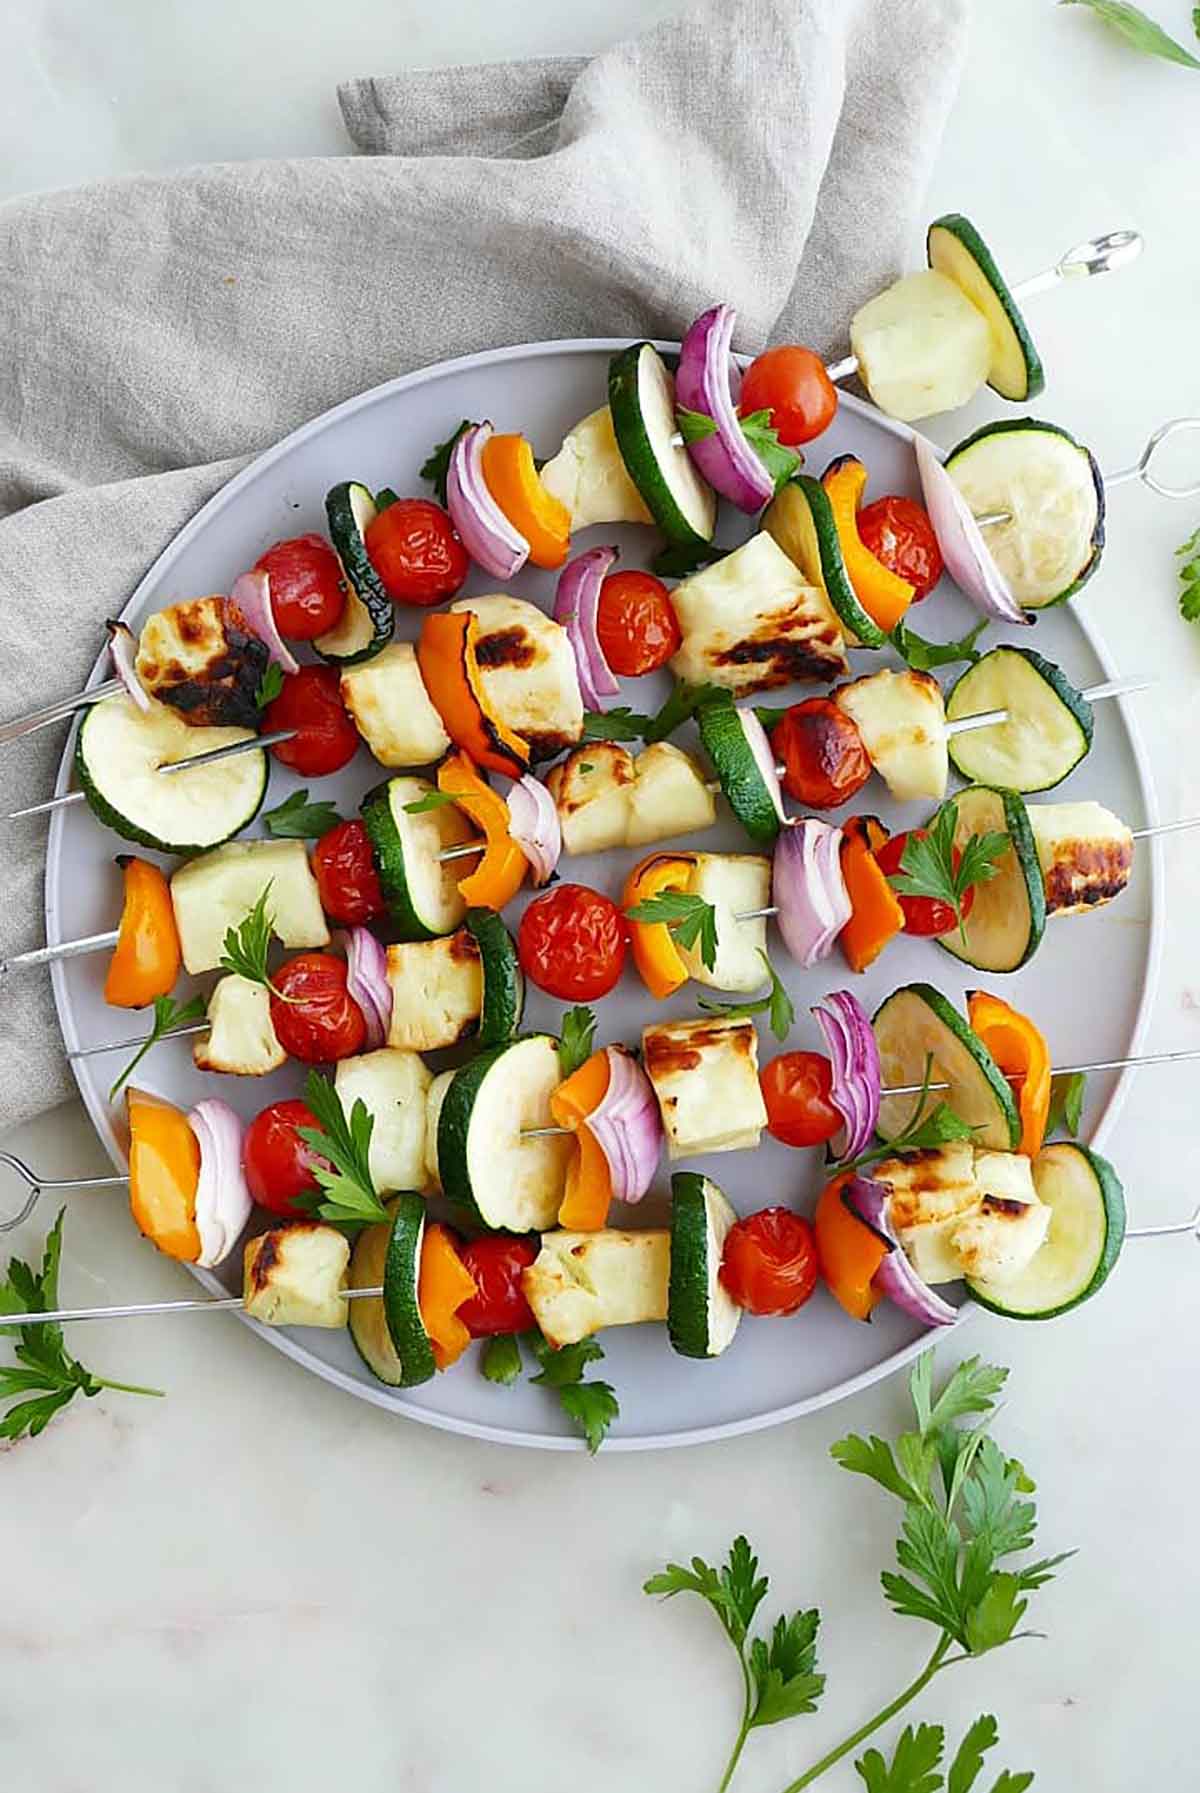 6 skewers on a plate with halumi and vegetables.